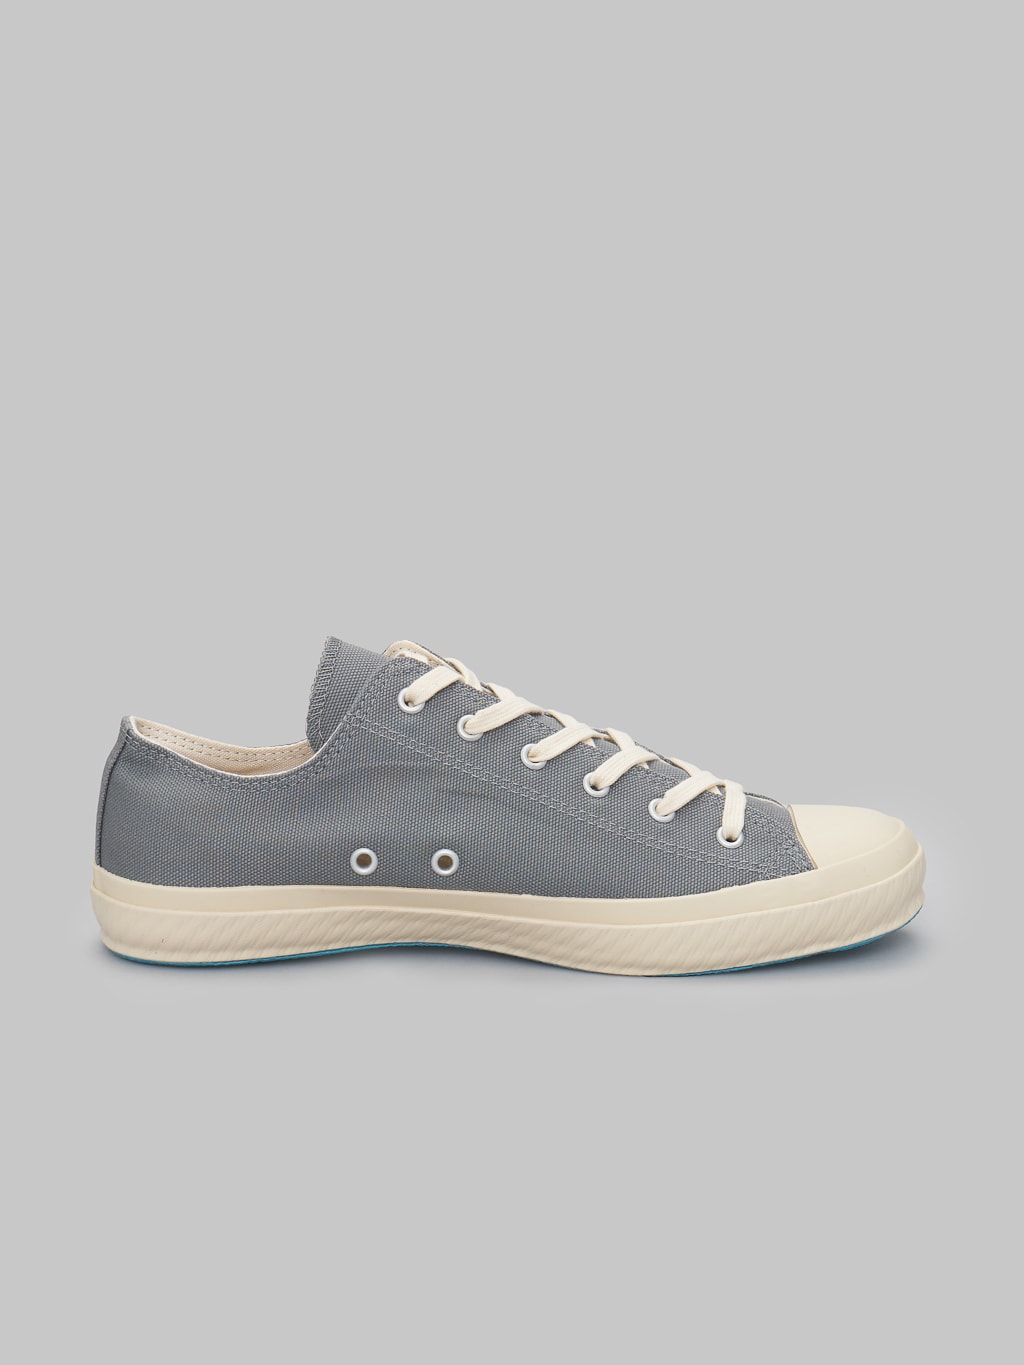 Shoes like pottery low grey sneakers ventilation side holes